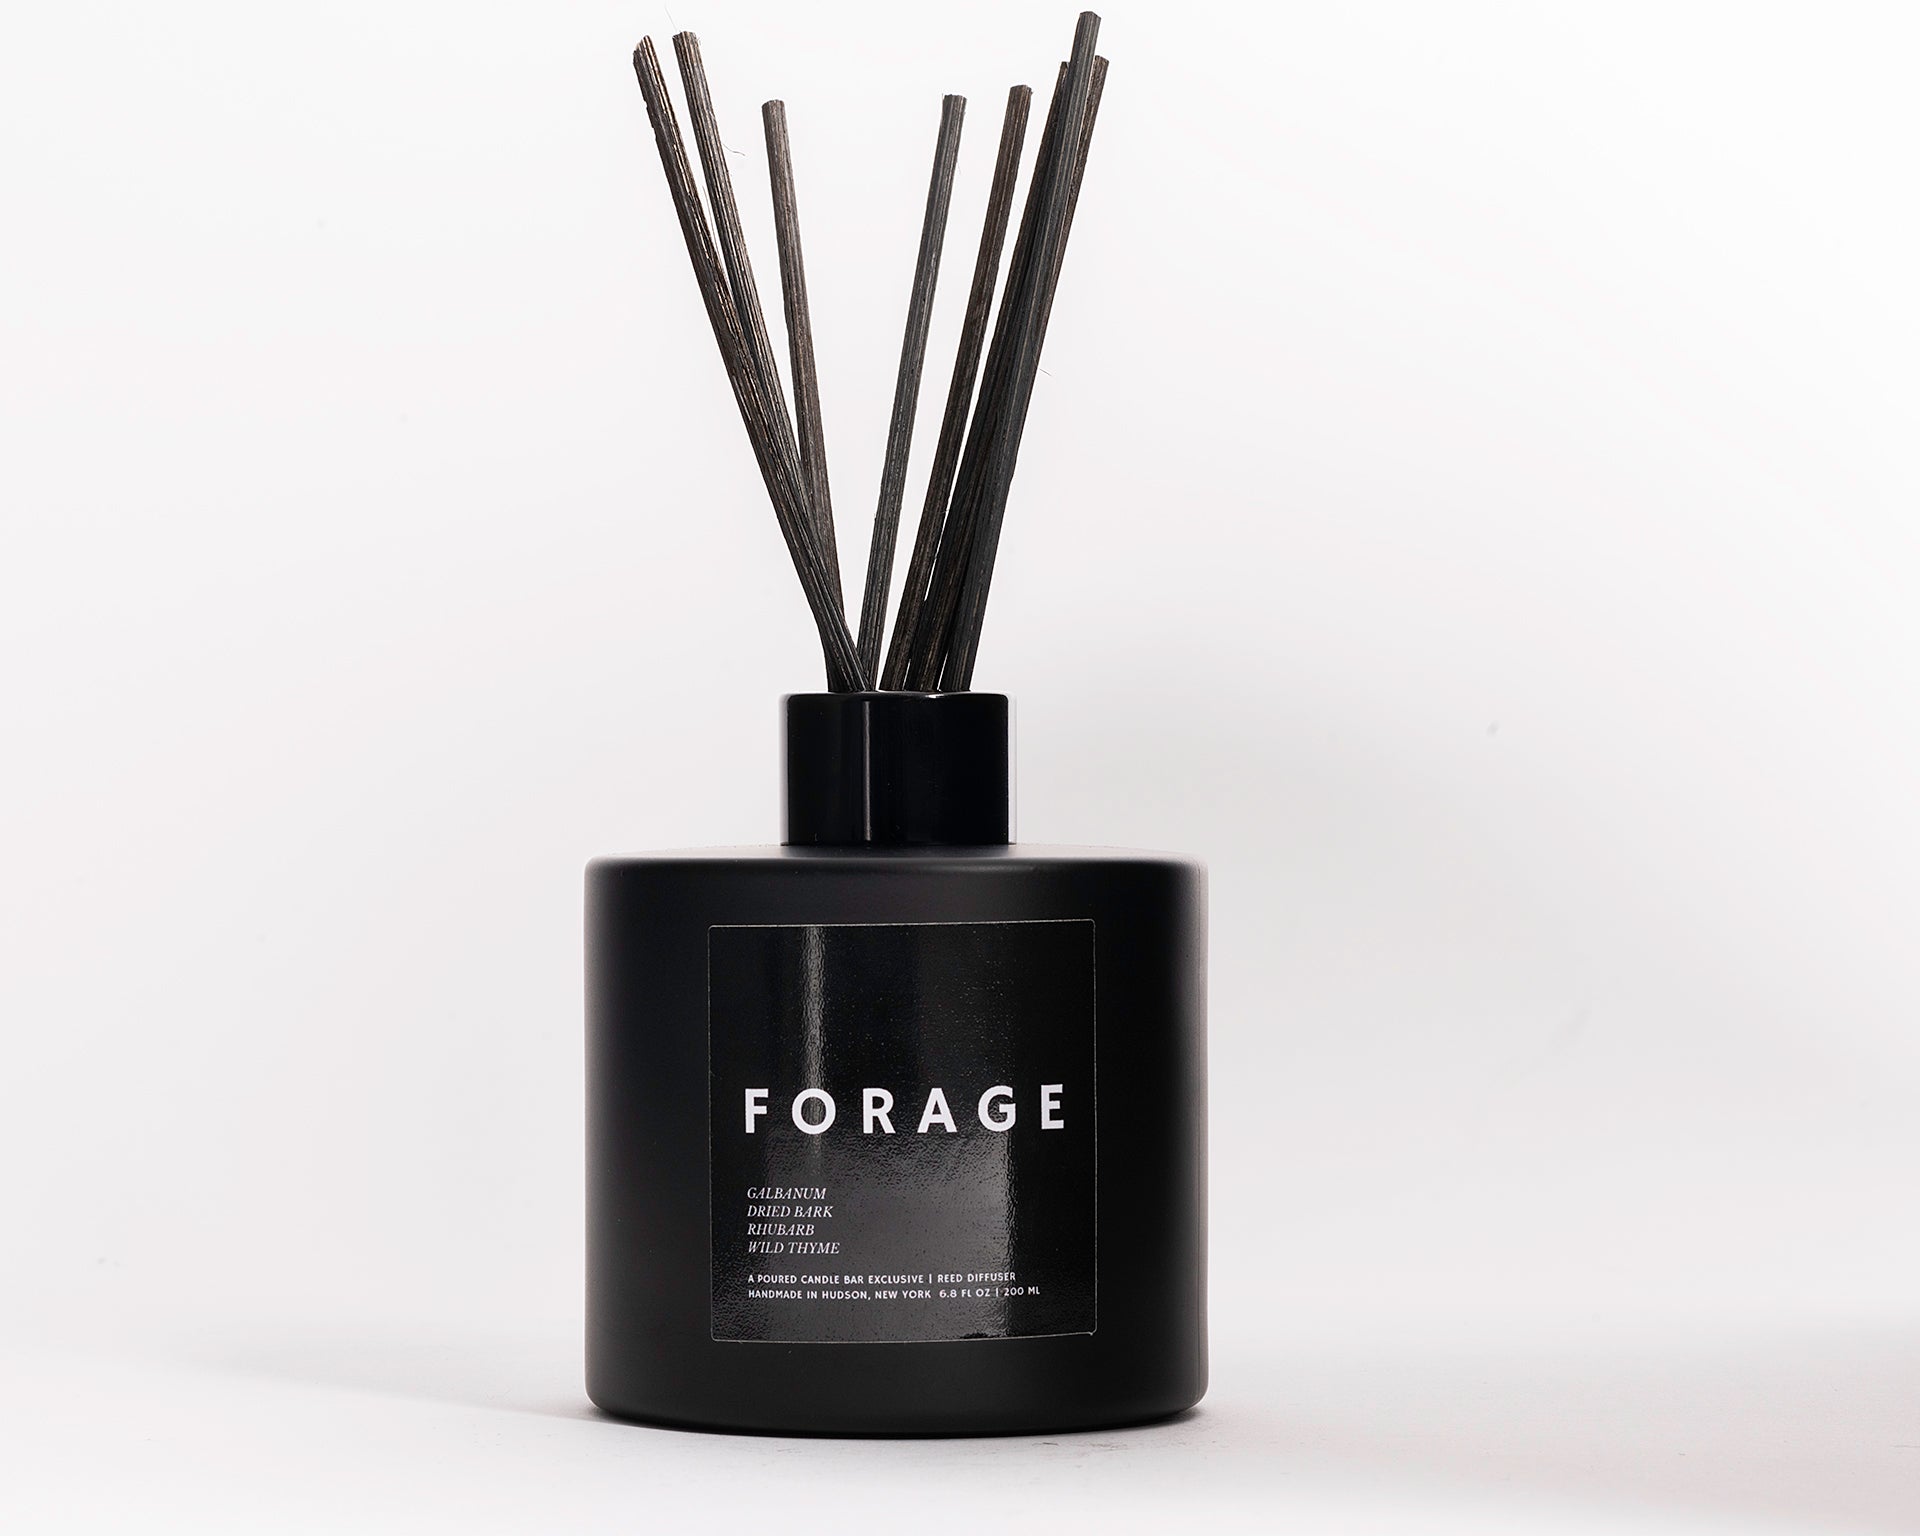 200 ml reed diffusers in a black circular glass vessel.  Profile Description:  Dried resin & wood with sweet & tart herbal impressions  Notes: Galbanum, Oakwood Bark, Rhubarb, Tart Zest, Wild Thyme